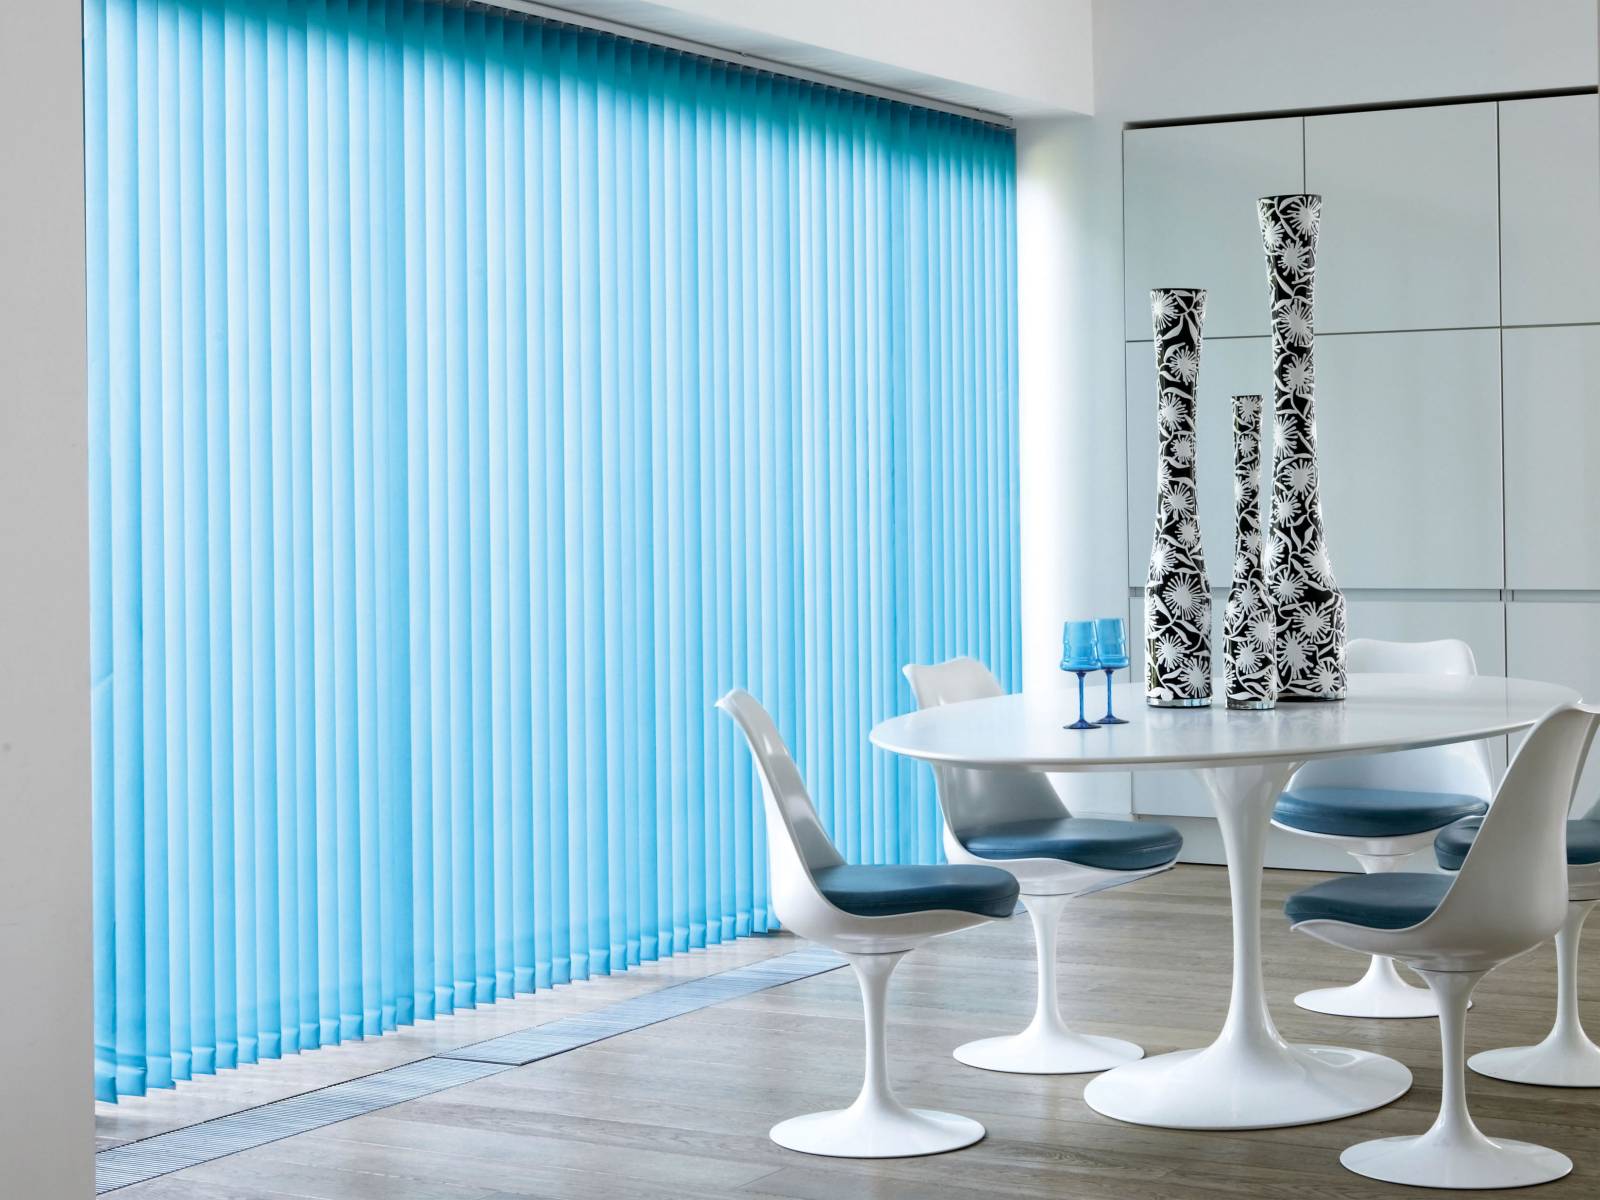 Awesome Rigid Pvc Vertical Blinds: Reviews And Replacement Slats Tips